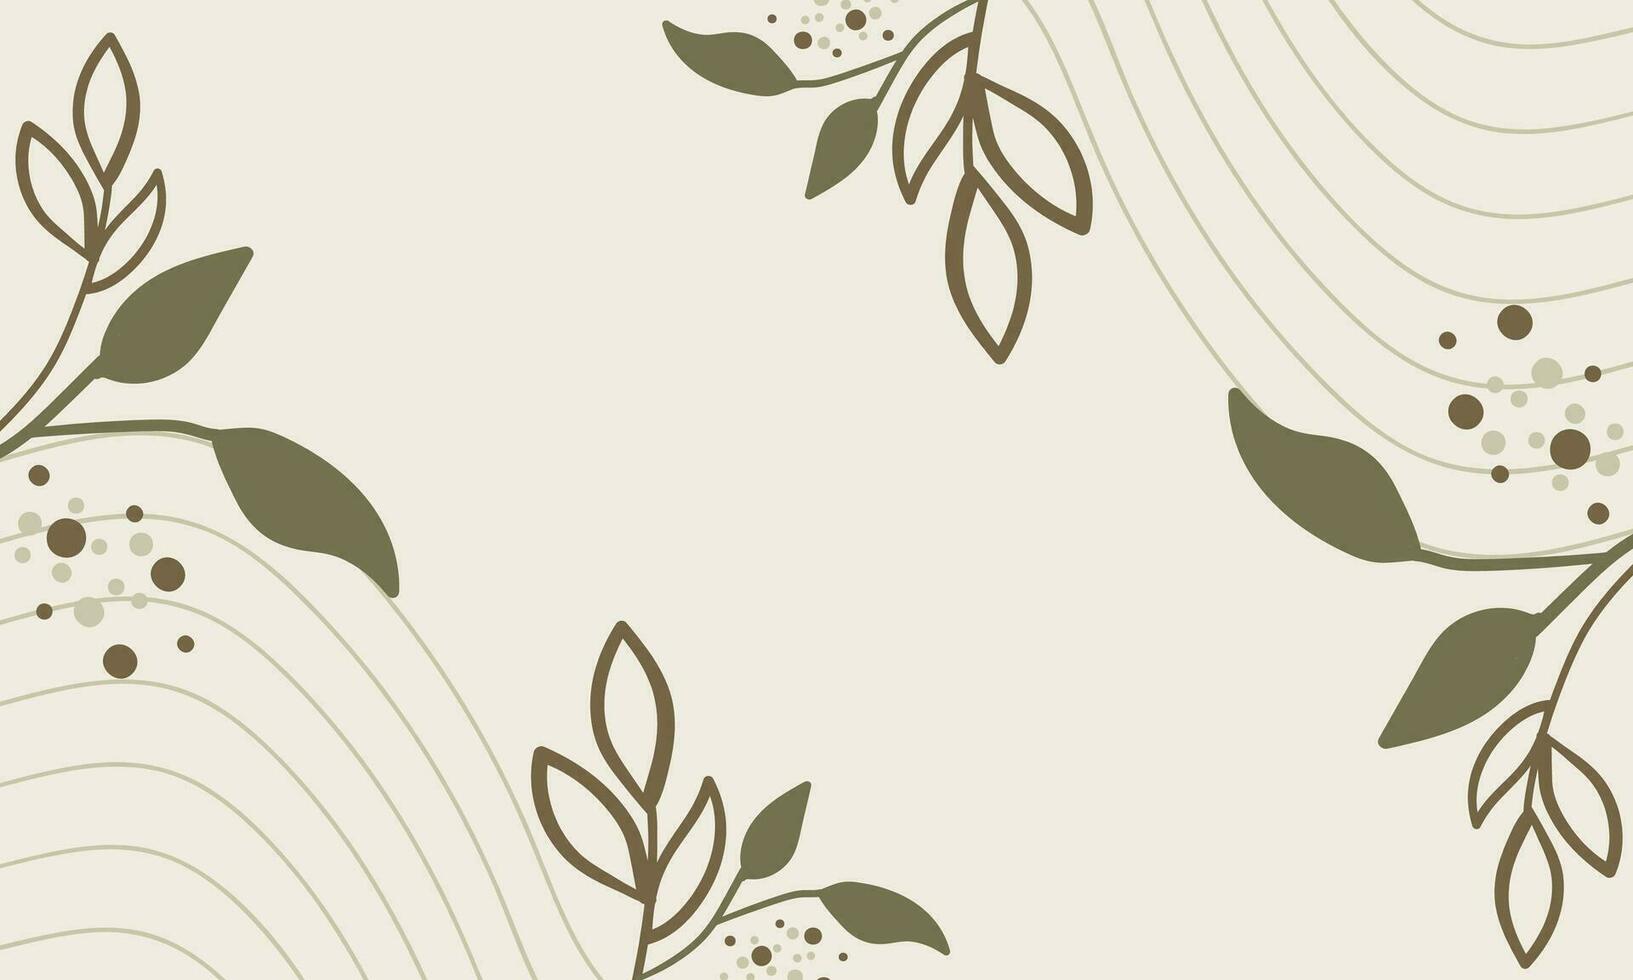 floral background with leaves and branches ornament vector